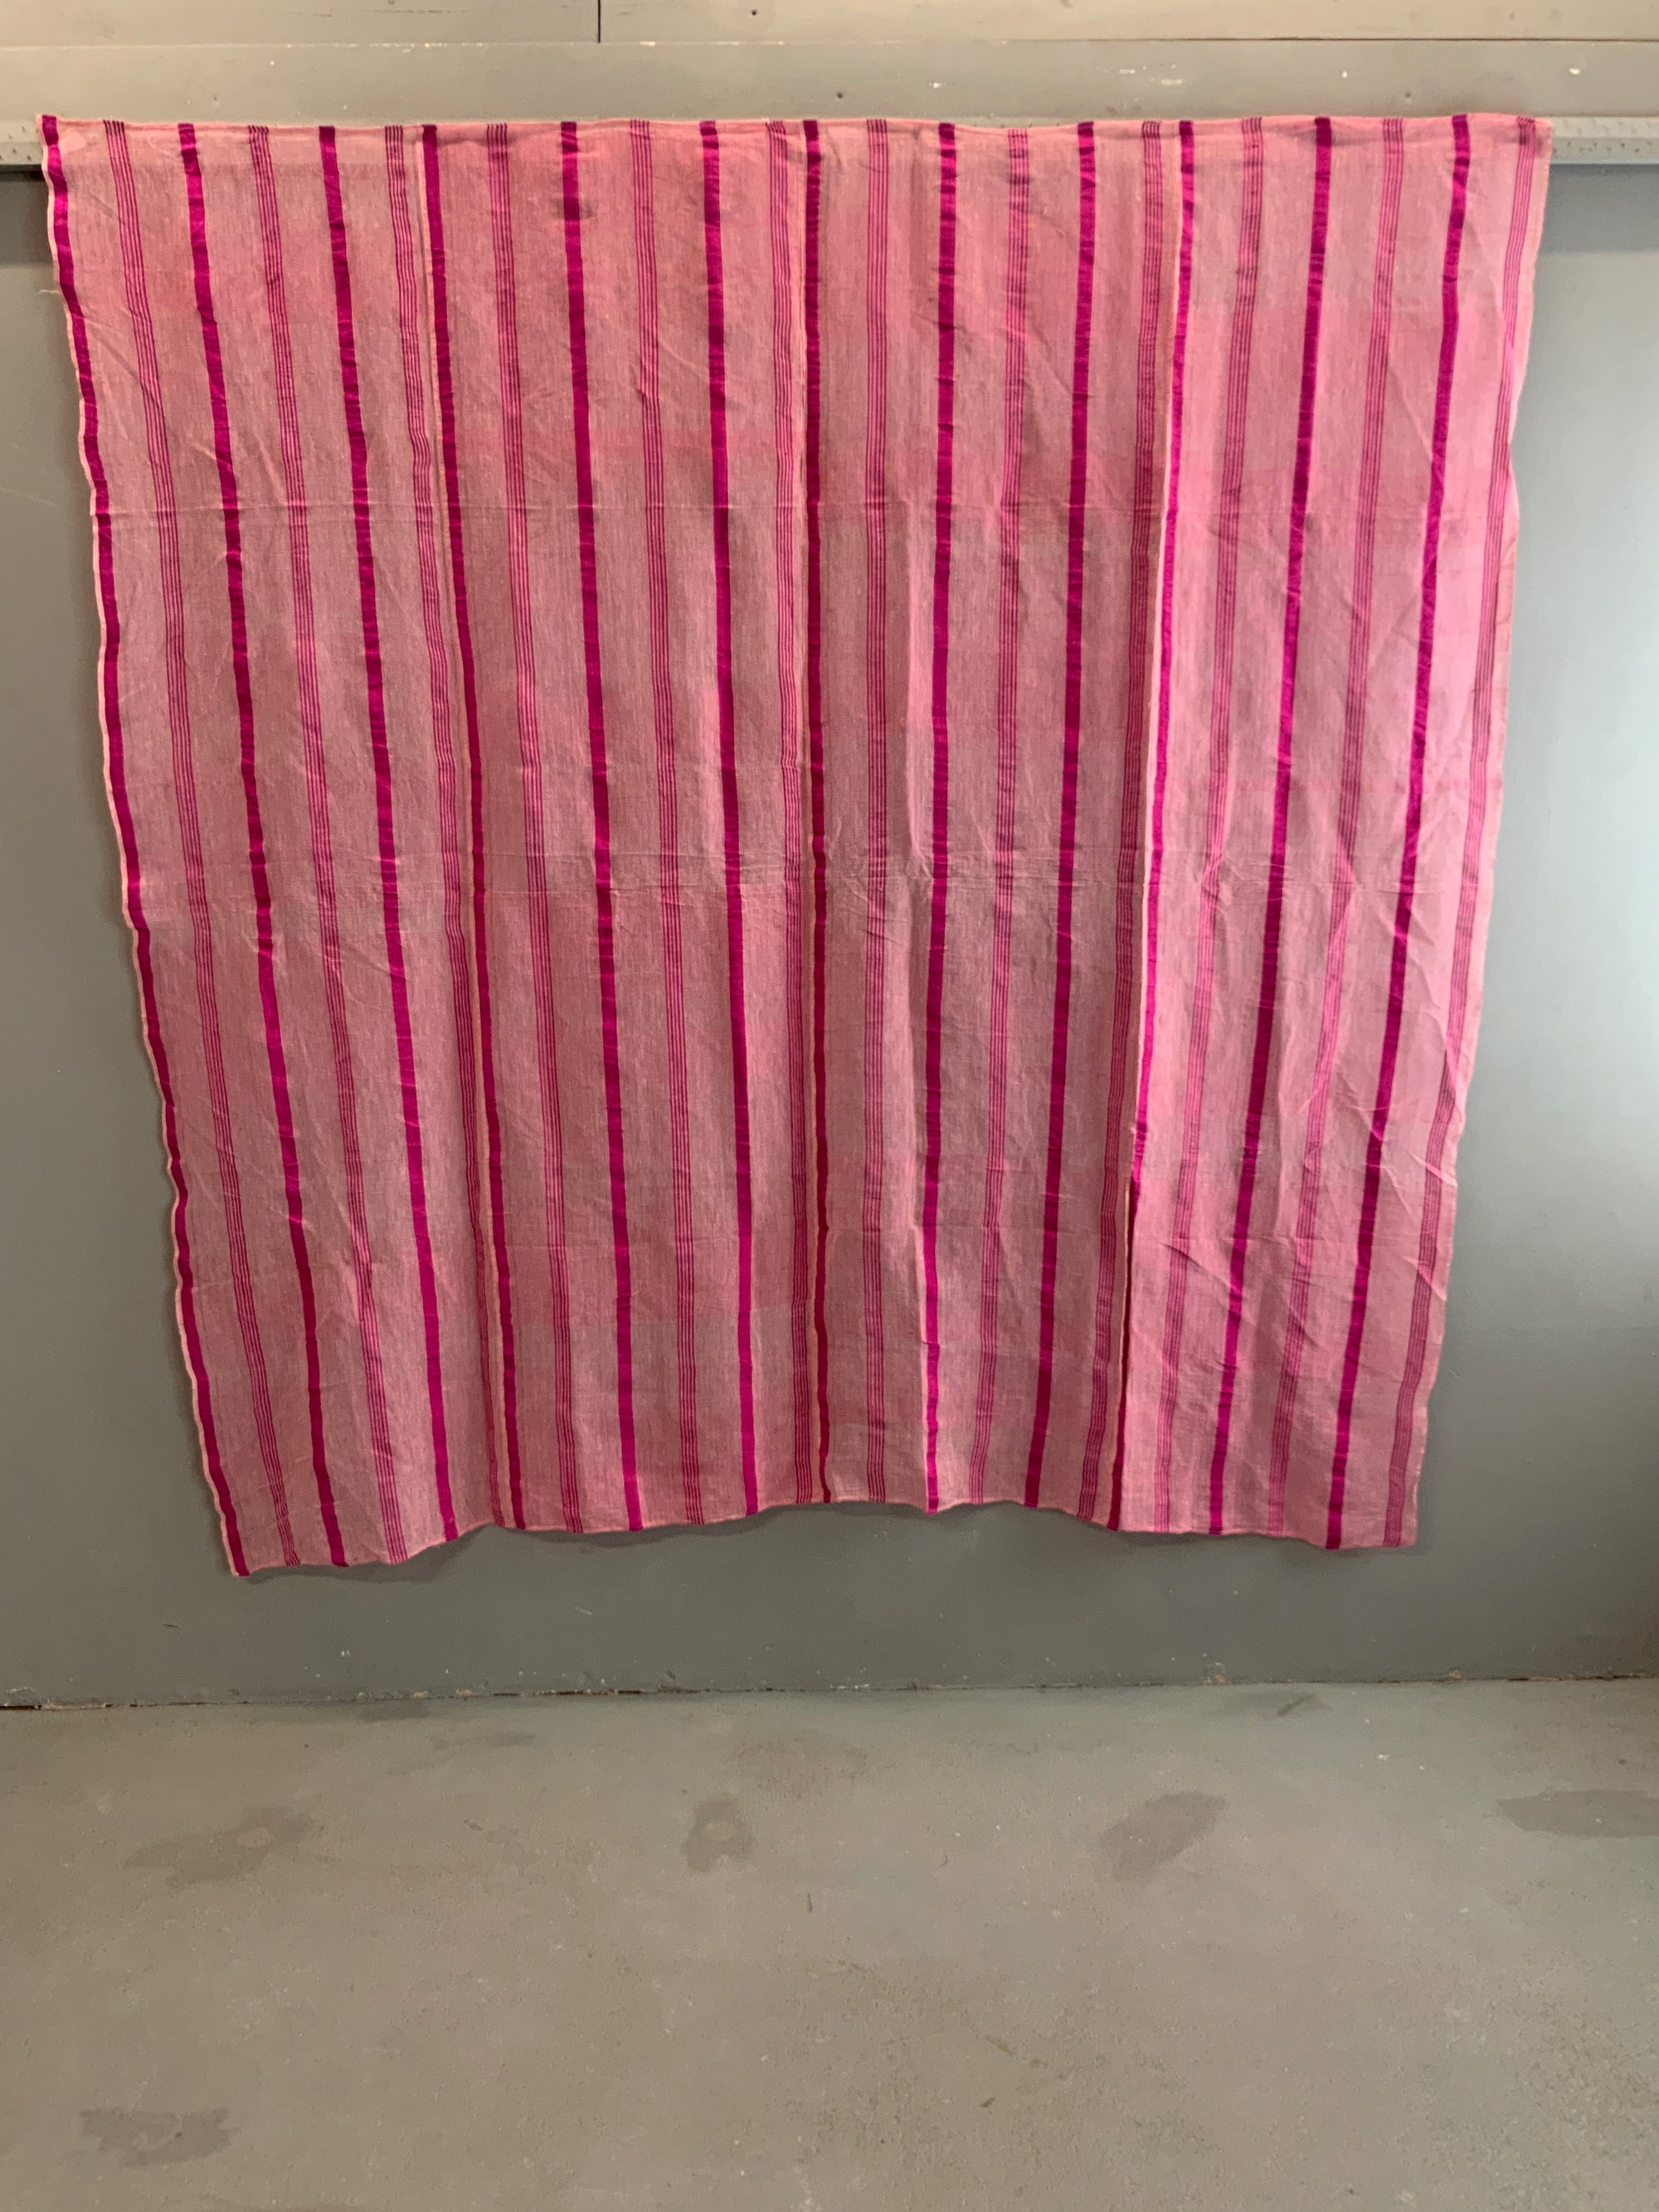 Late Ottoman pink silk and linen gauze in four panels (207 x 203cm)